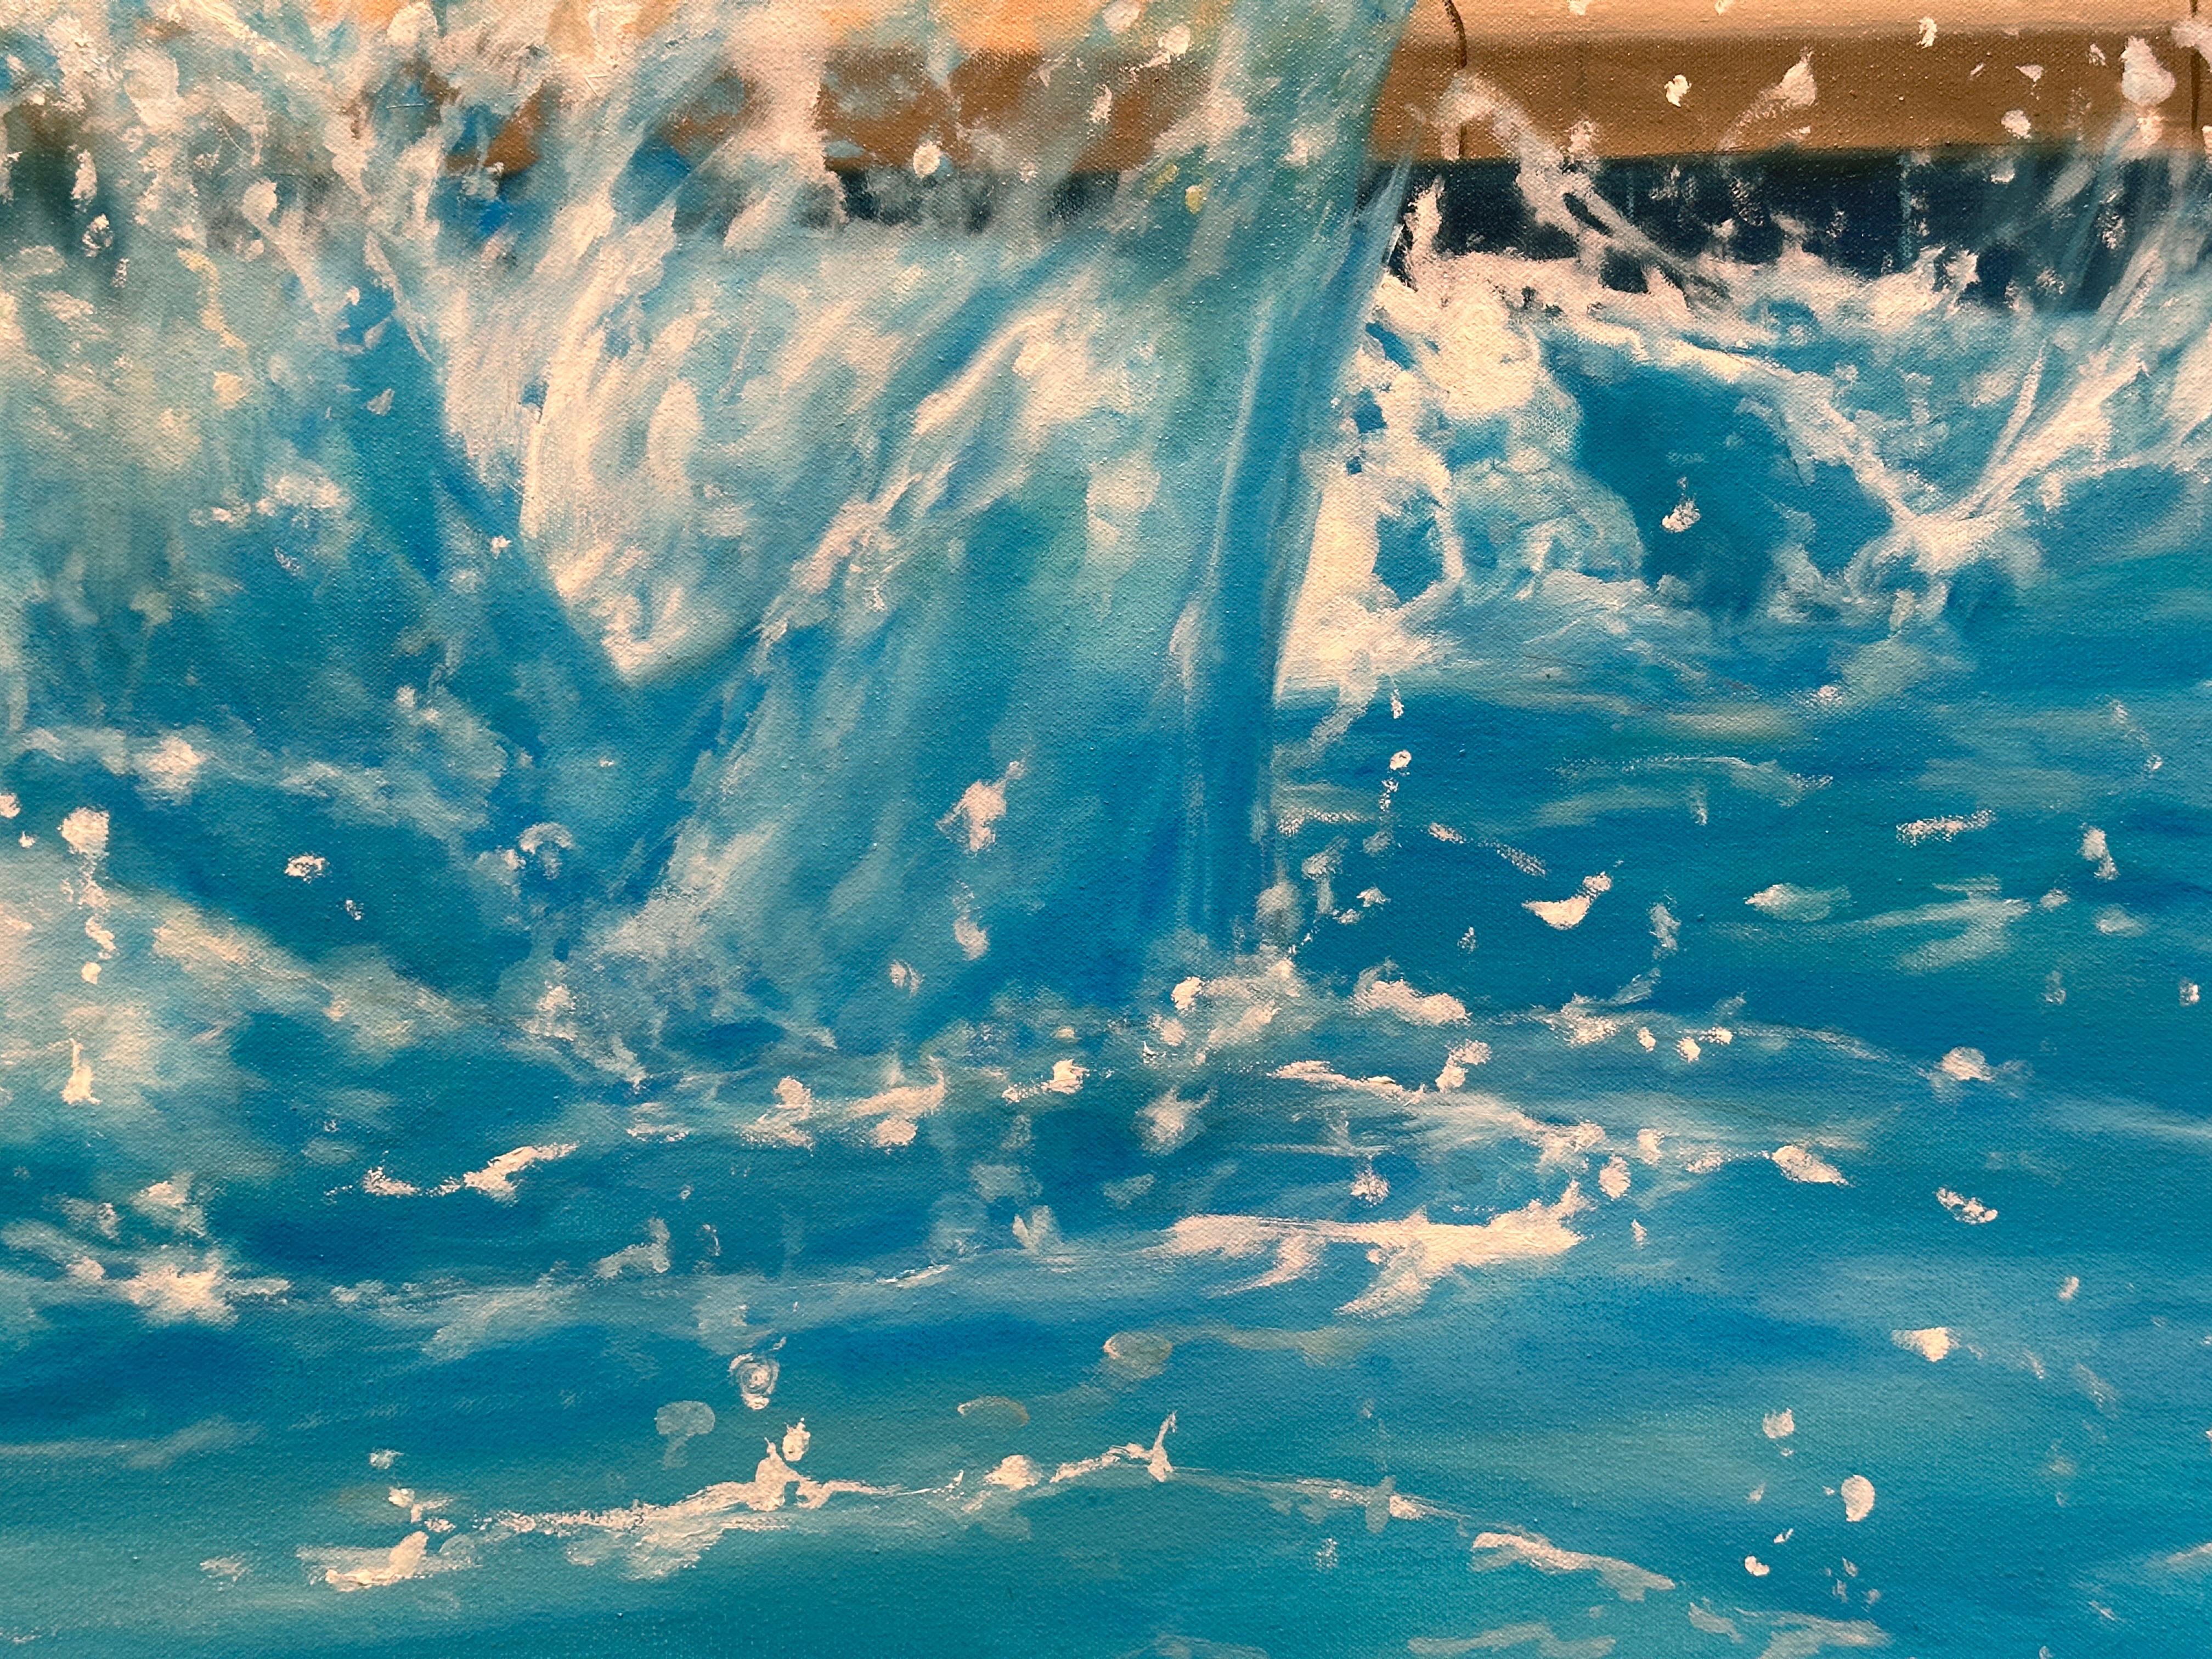 MONTECITO MORNING - Contemporary Realism / Pool Water Scene / California Vibe For Sale 2